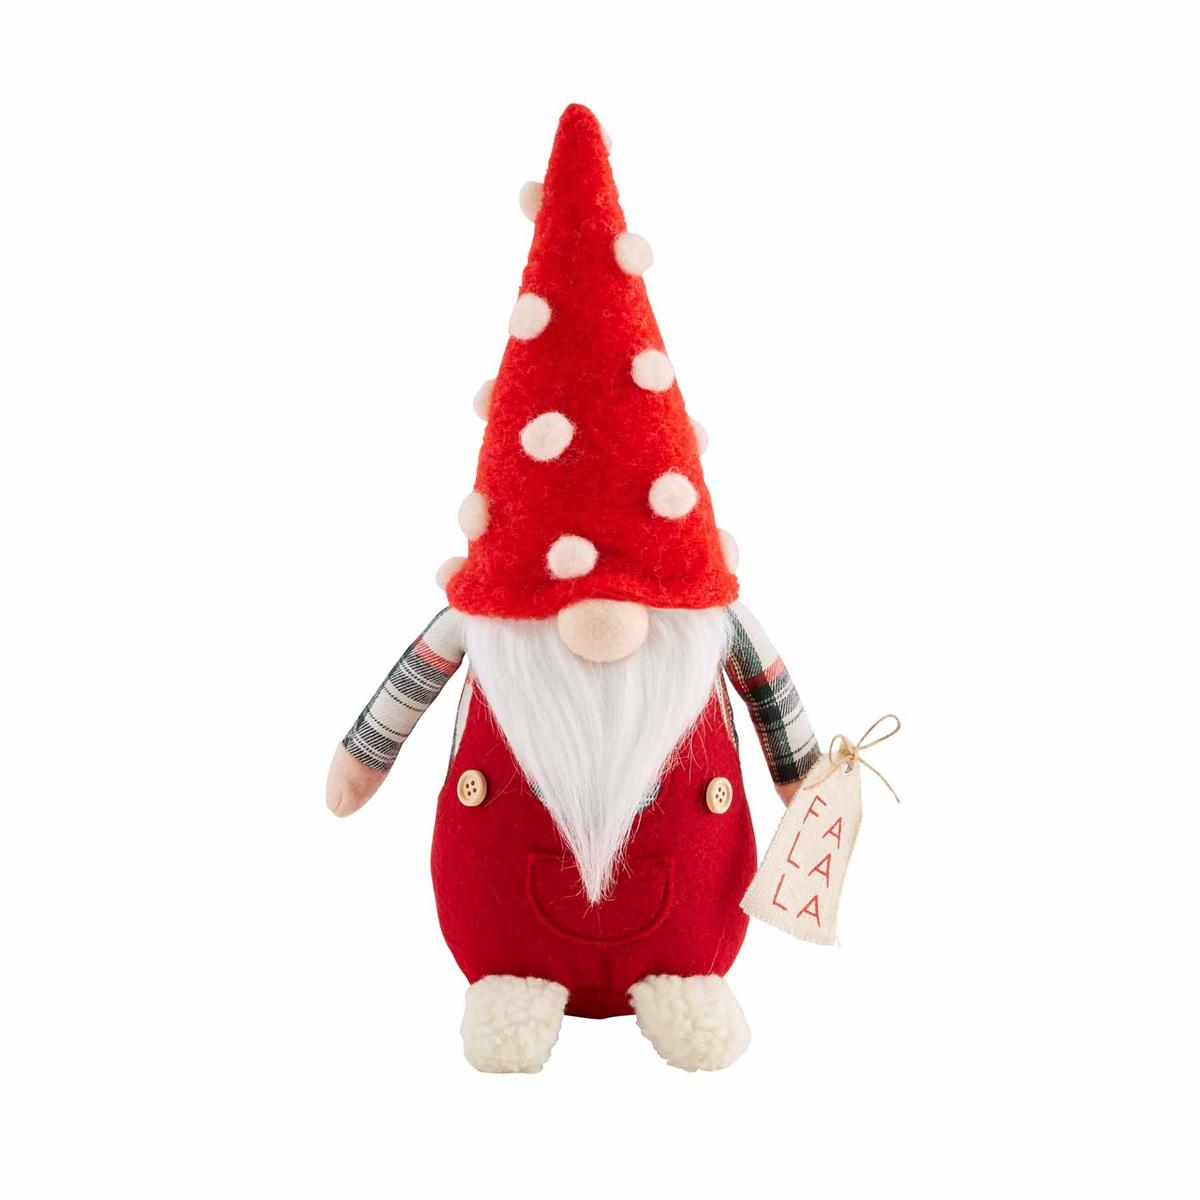 A red Christmas gnome, holding a bag that says, "fa, la, la" from Mud Pie.